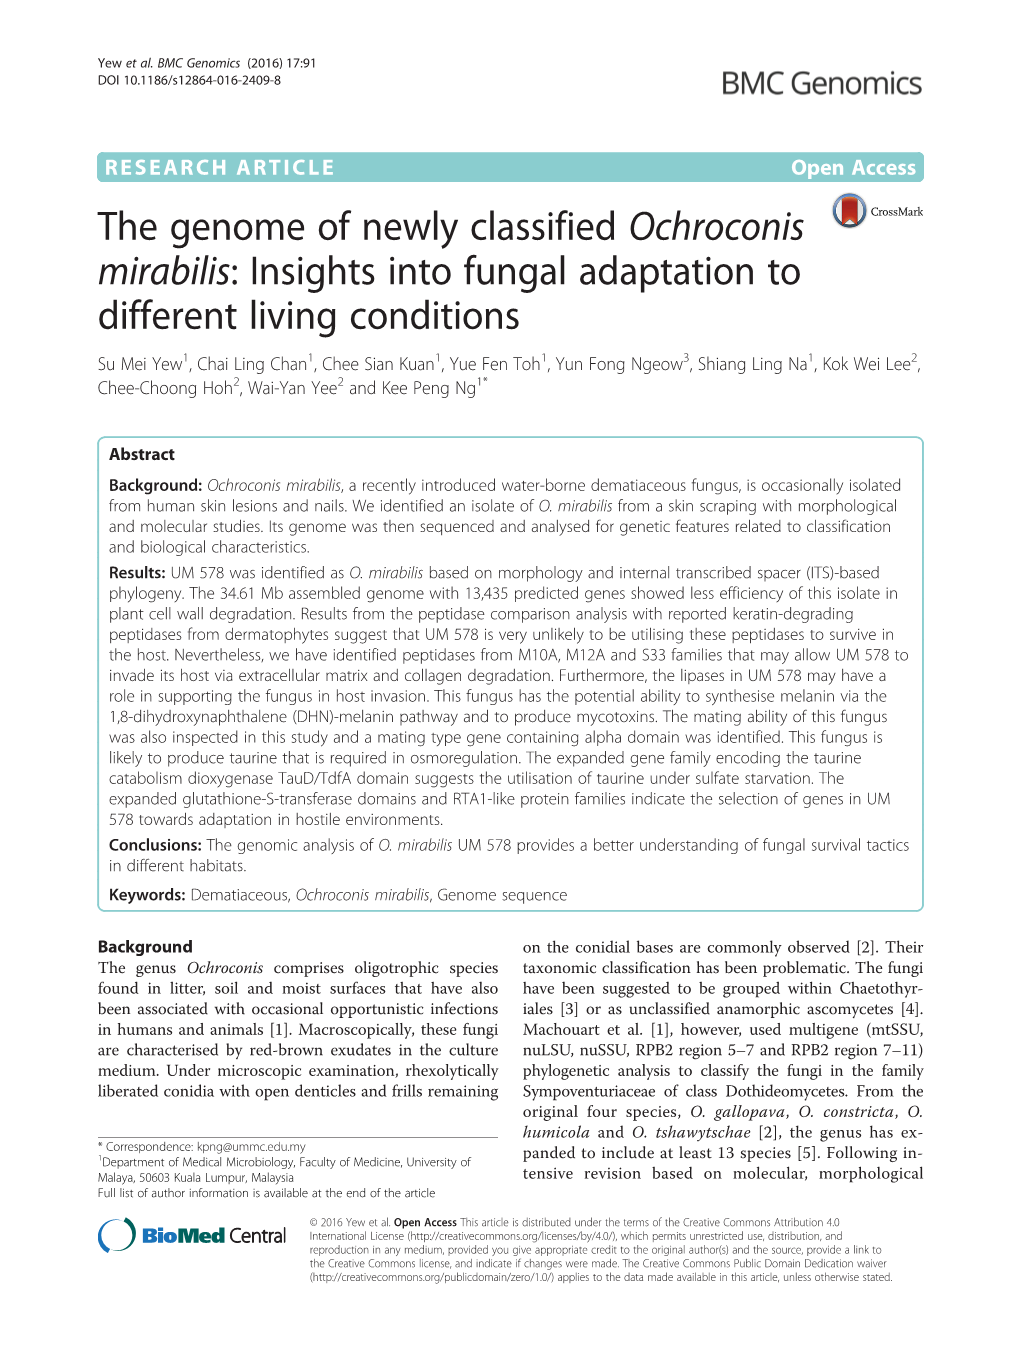 The Genome of Newly Classified Ochroconis Mirabilis